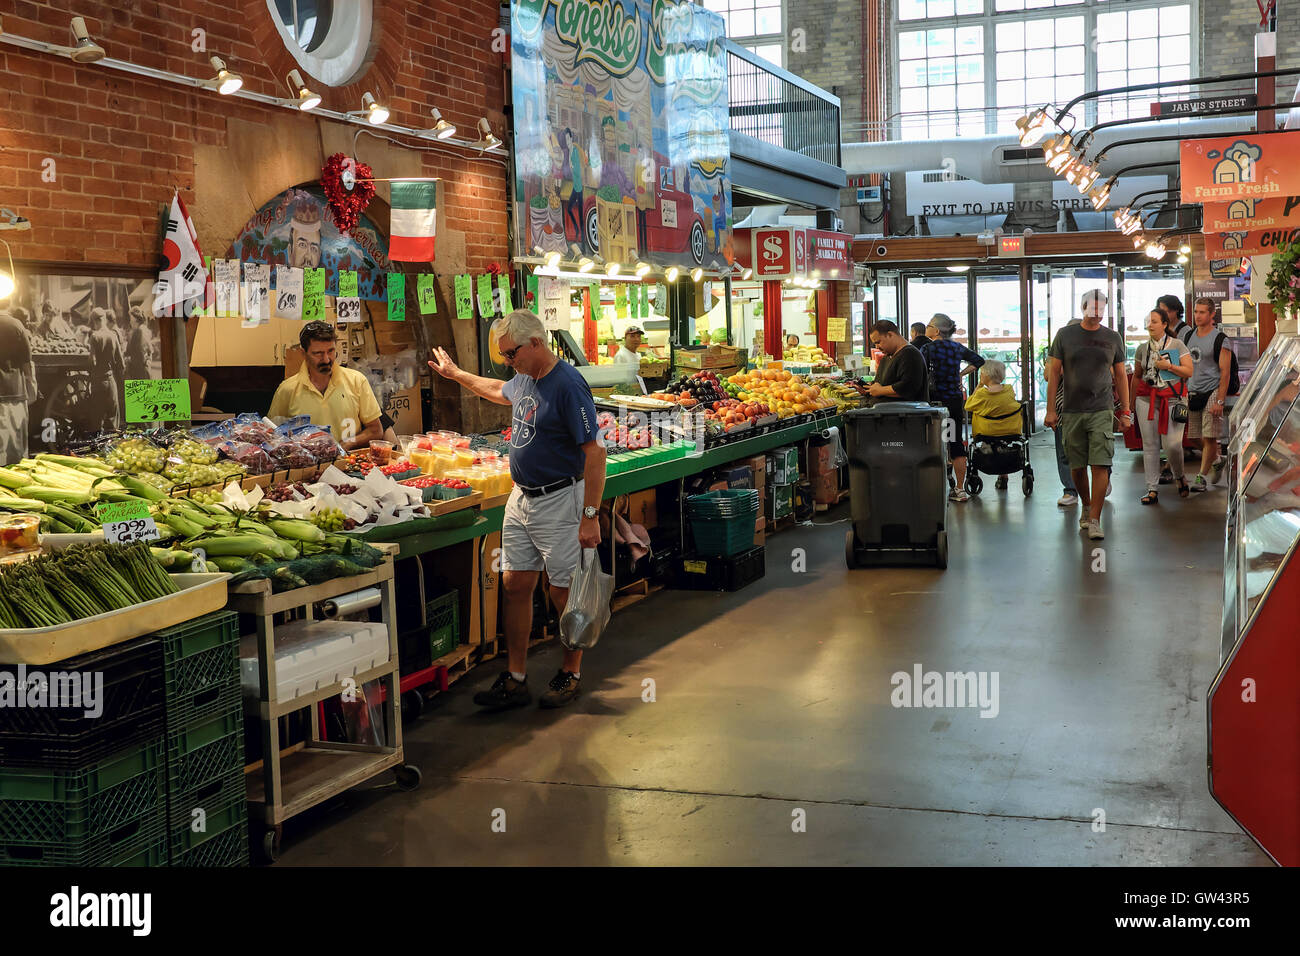 August 18, 2016 - Toronto Ontario, Canada. Since 1803 The St. Lawrence Market has been a mainstay in Toronto. Stock Photo